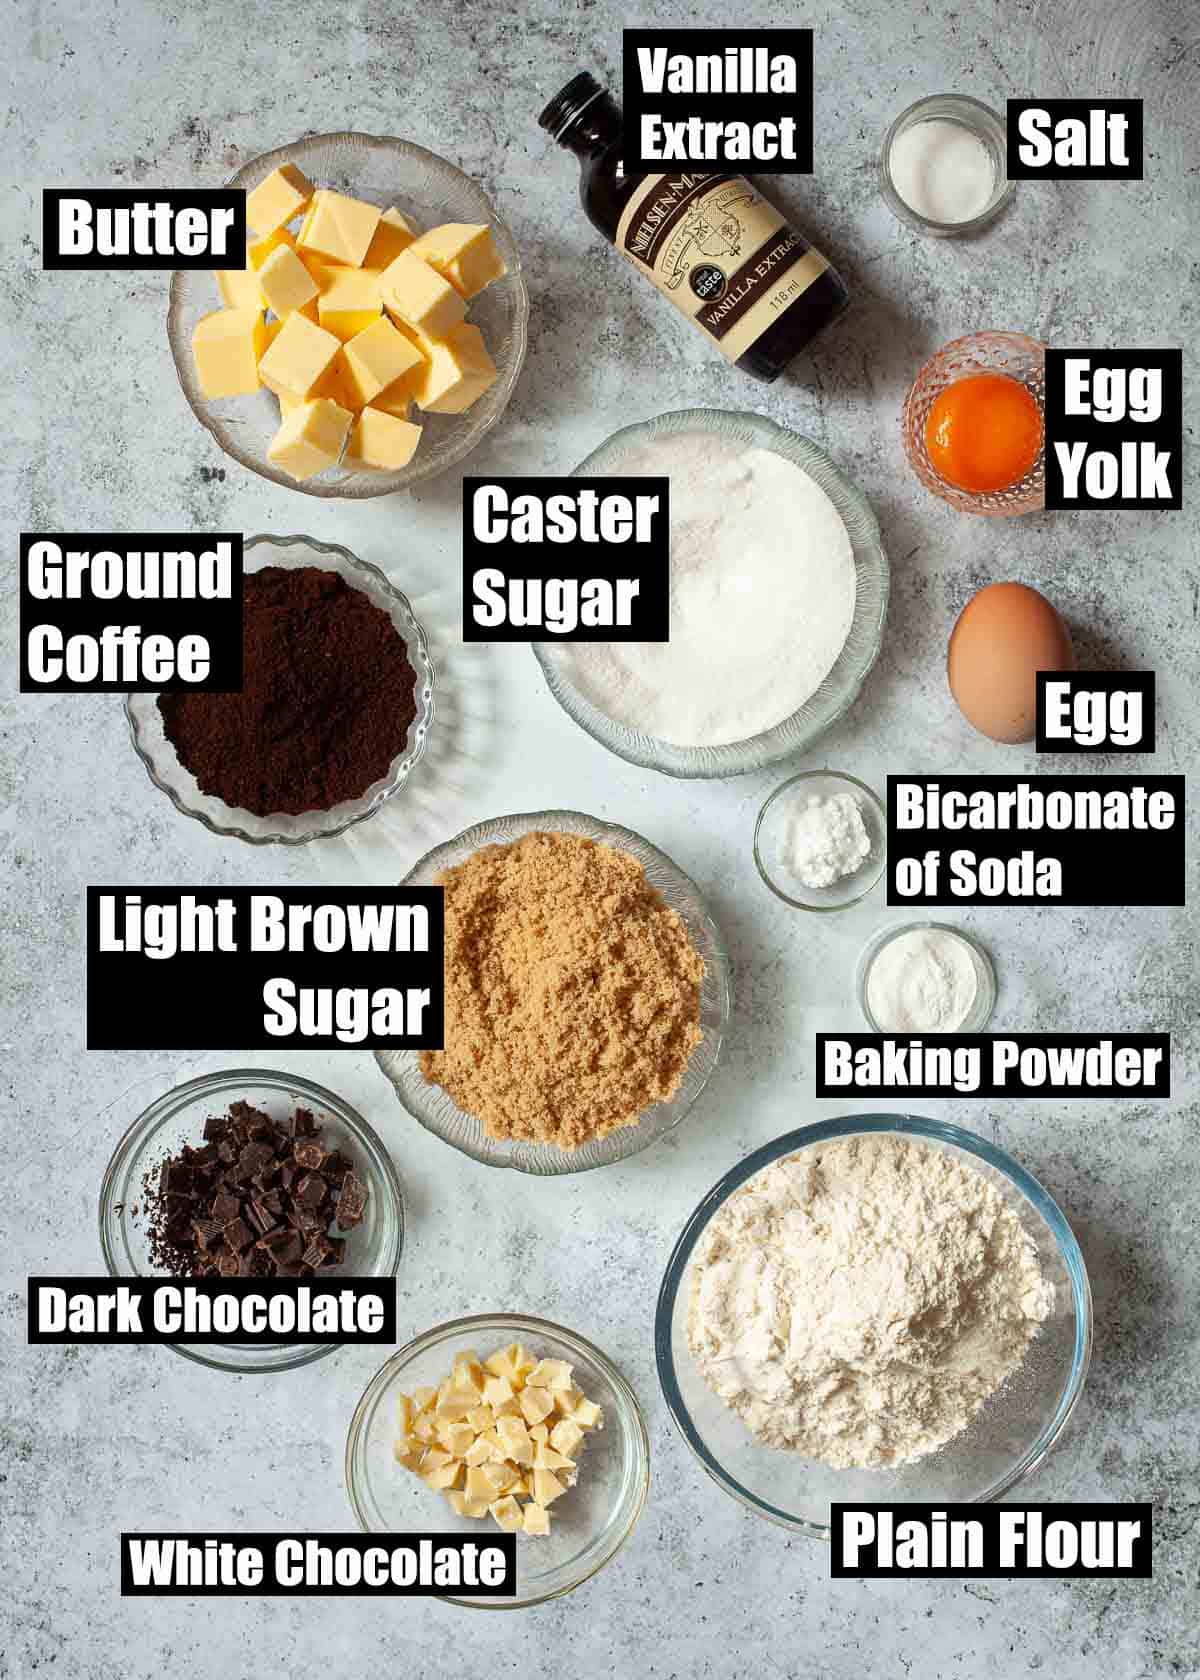 Ingredients for a biscuit recipe with chocolate and espresso.